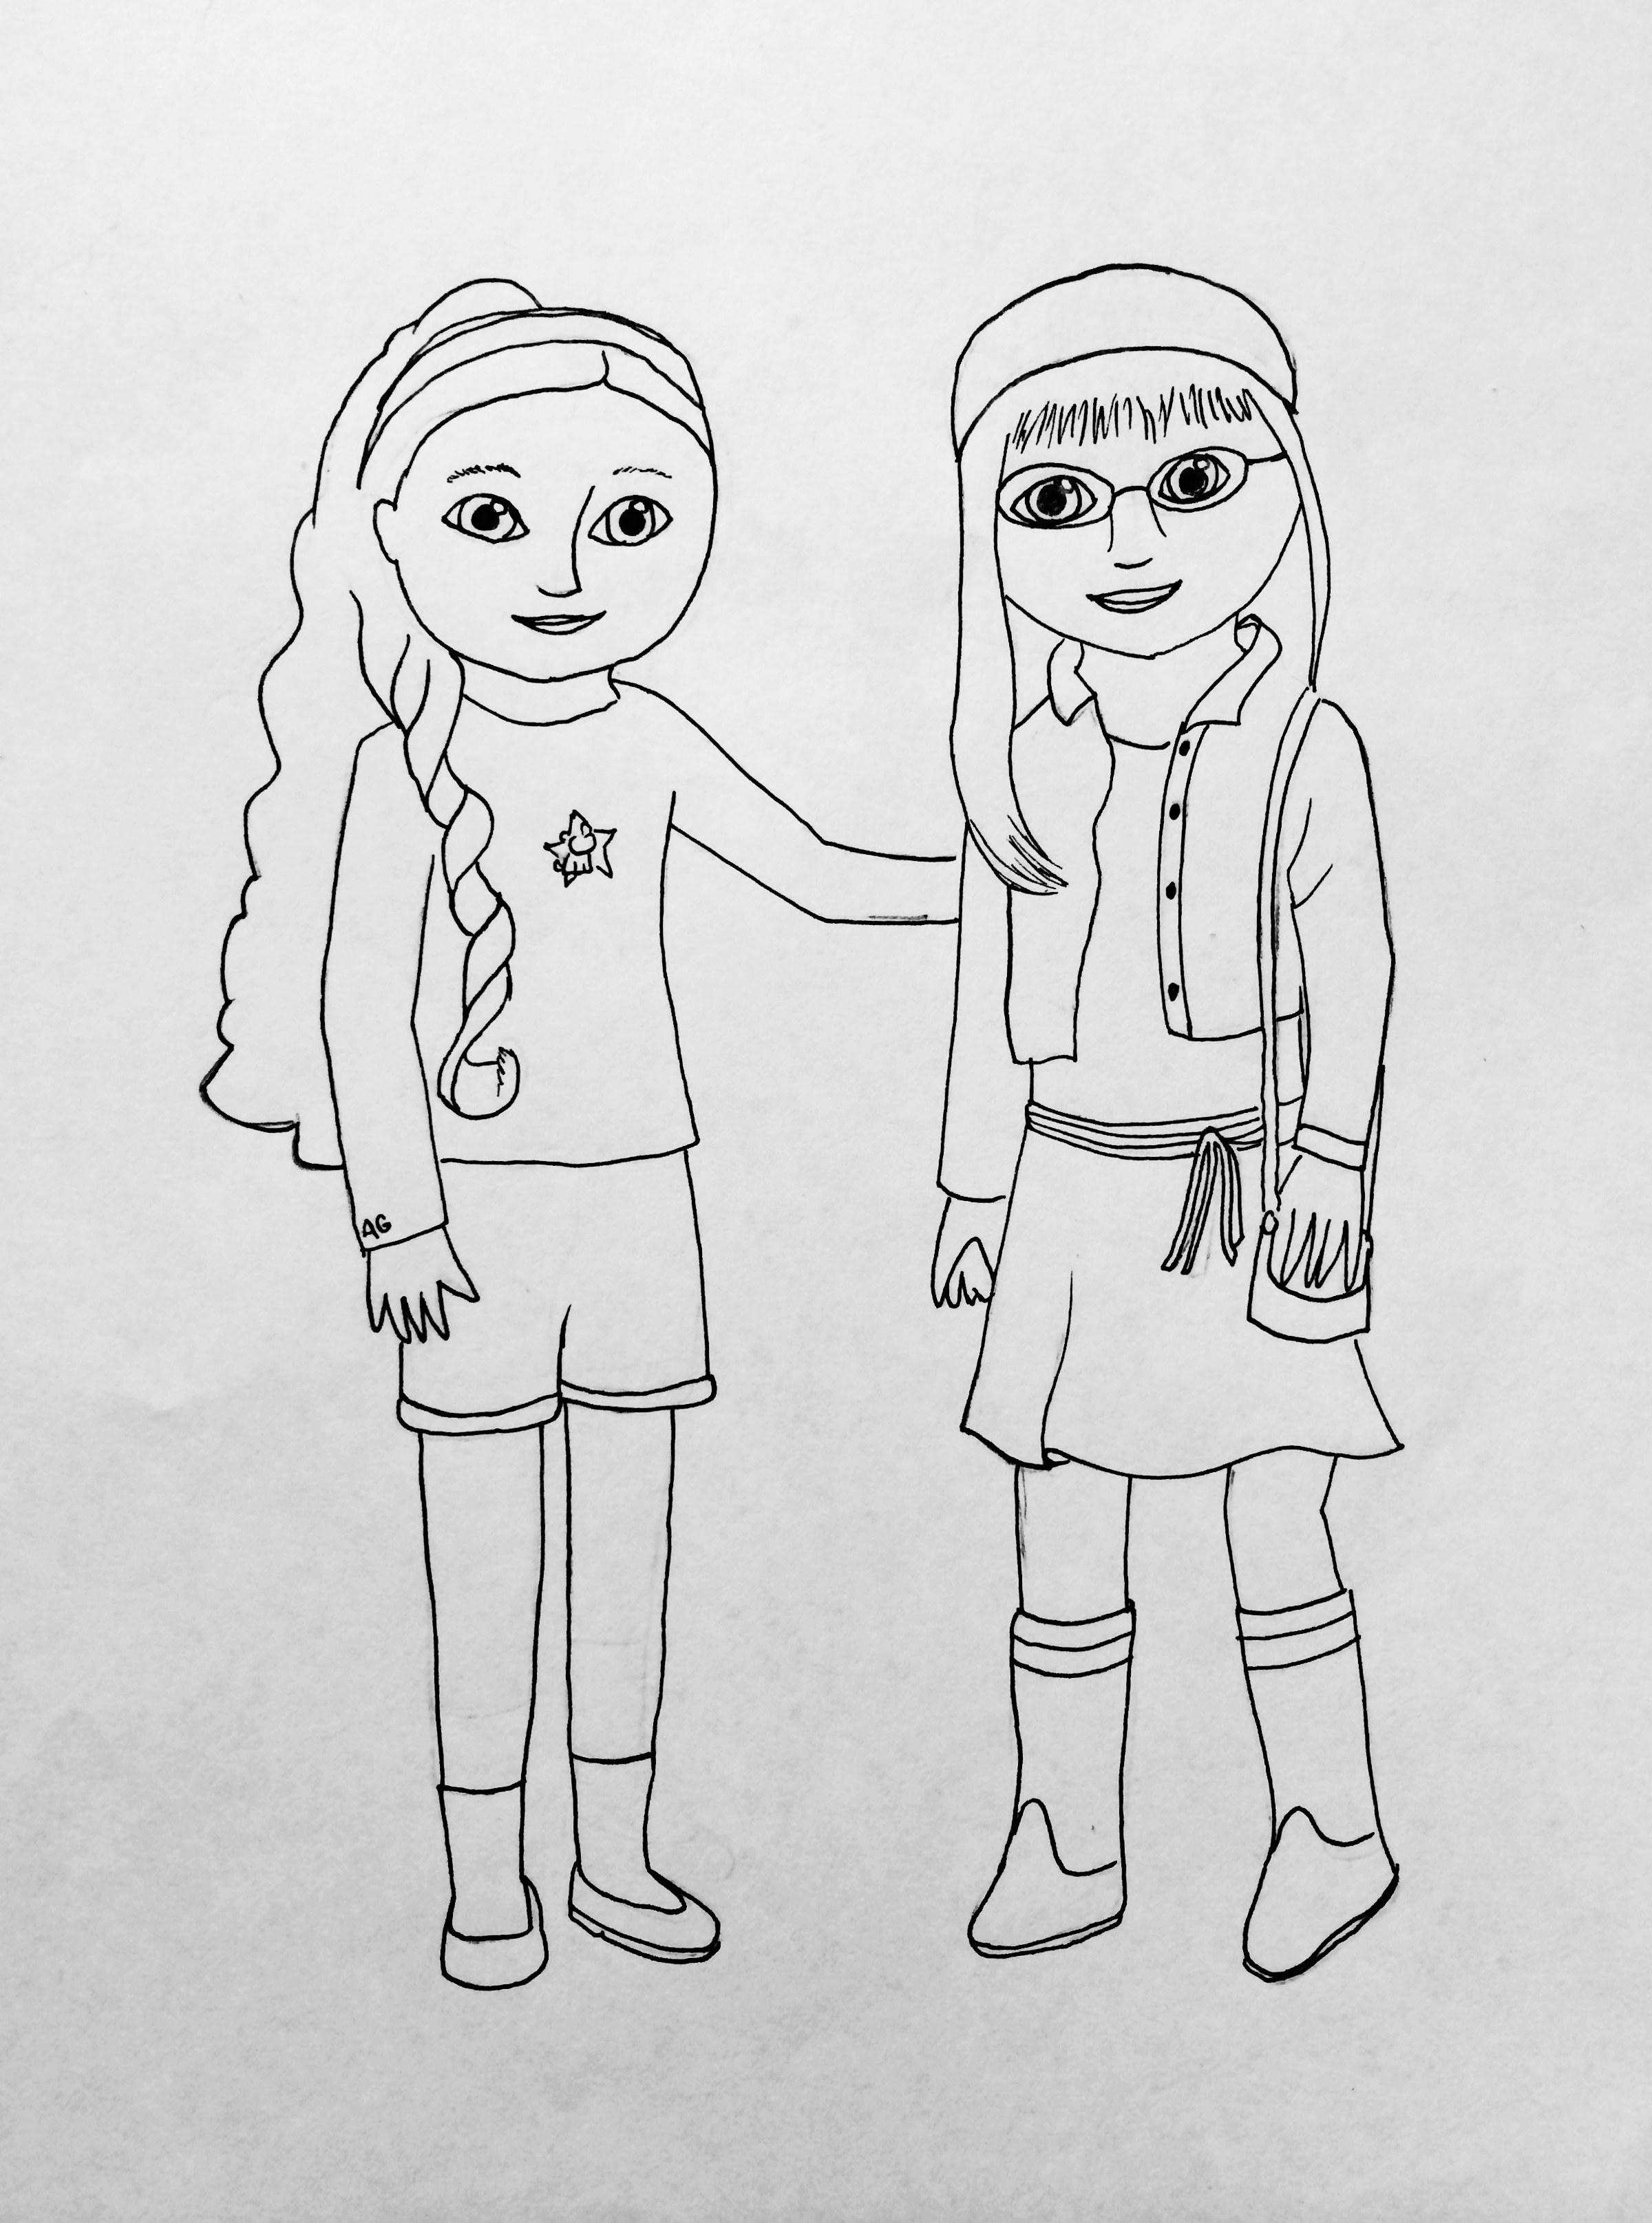 American Girl Coloring Pages Samantha
 Coloring Pages American Girl Coloring Pages Jpg American